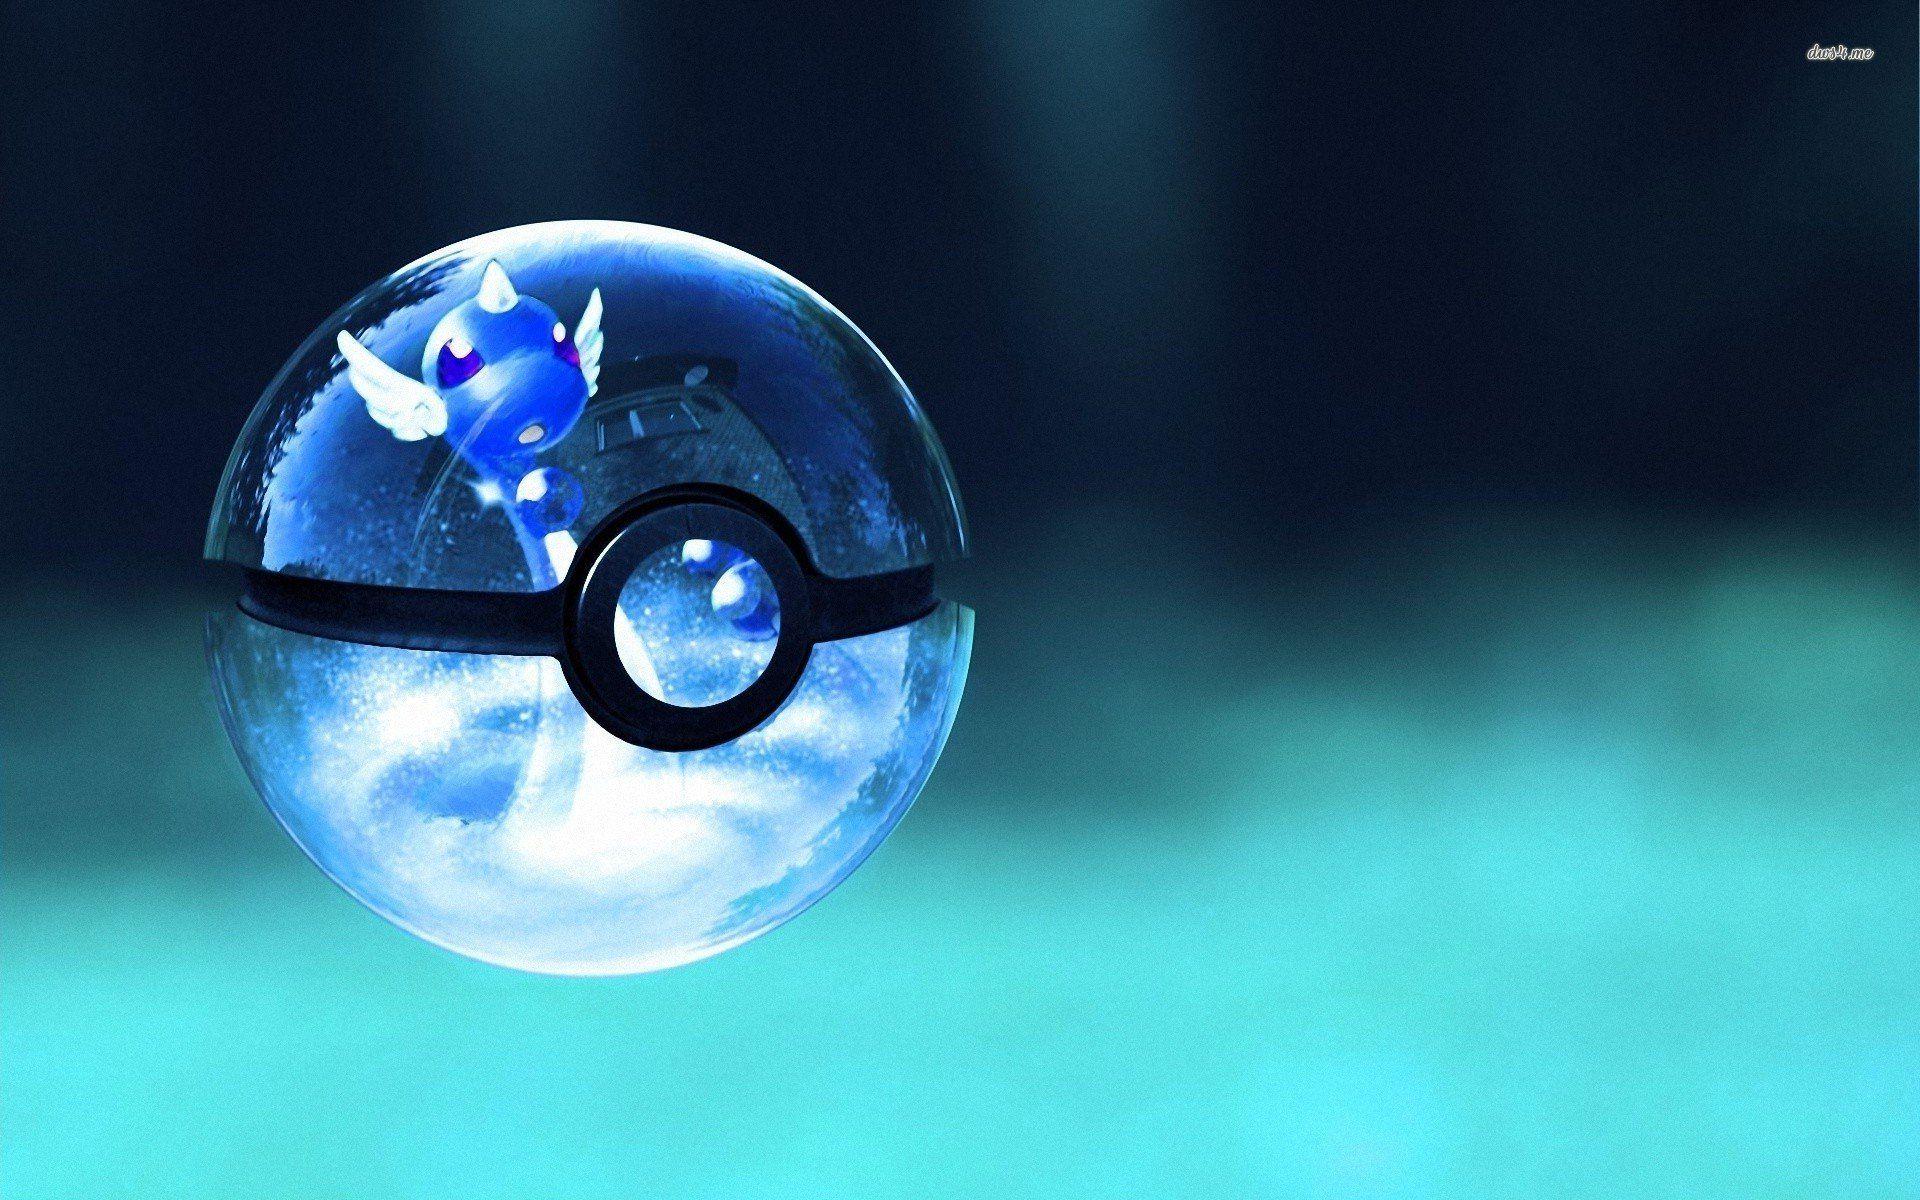 Pokemon Ball In The Drained Light And Water Background, Pokeball Pictures  Background Image And Wallpaper for Free Download